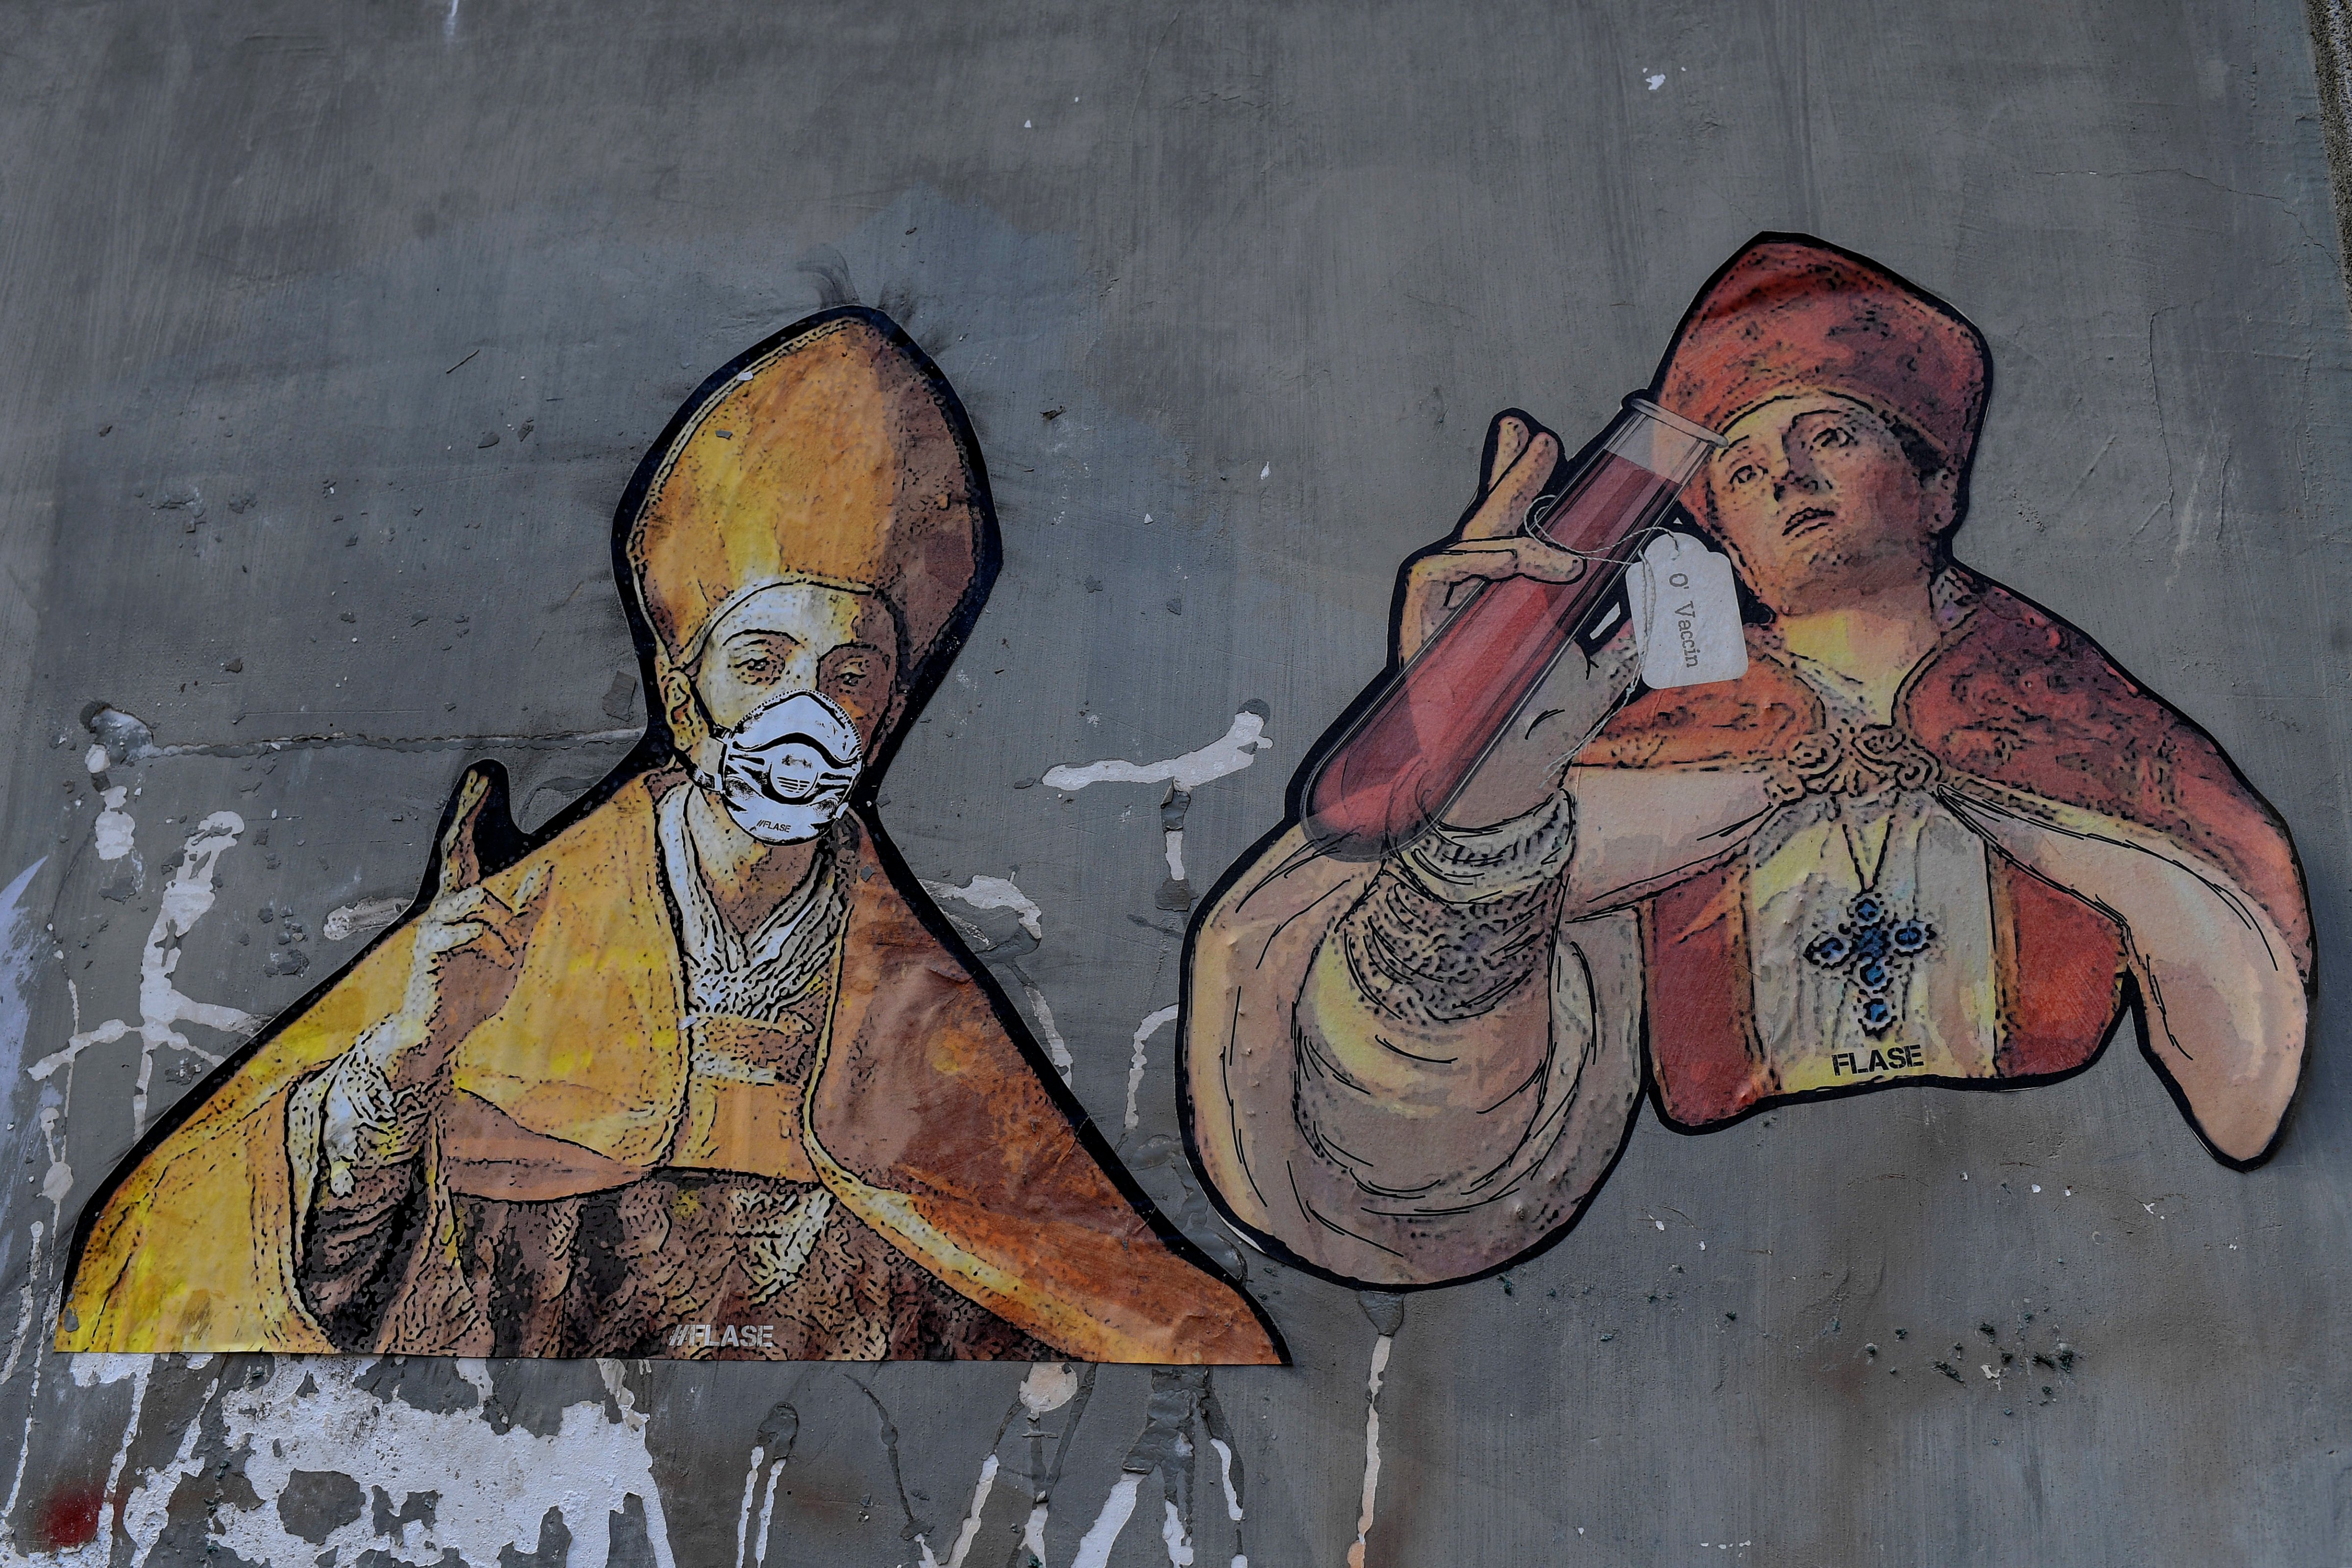 A mural depicting two figures of Saint Gennaro, patron of Naples, with a protective mask and an ampule with the label 